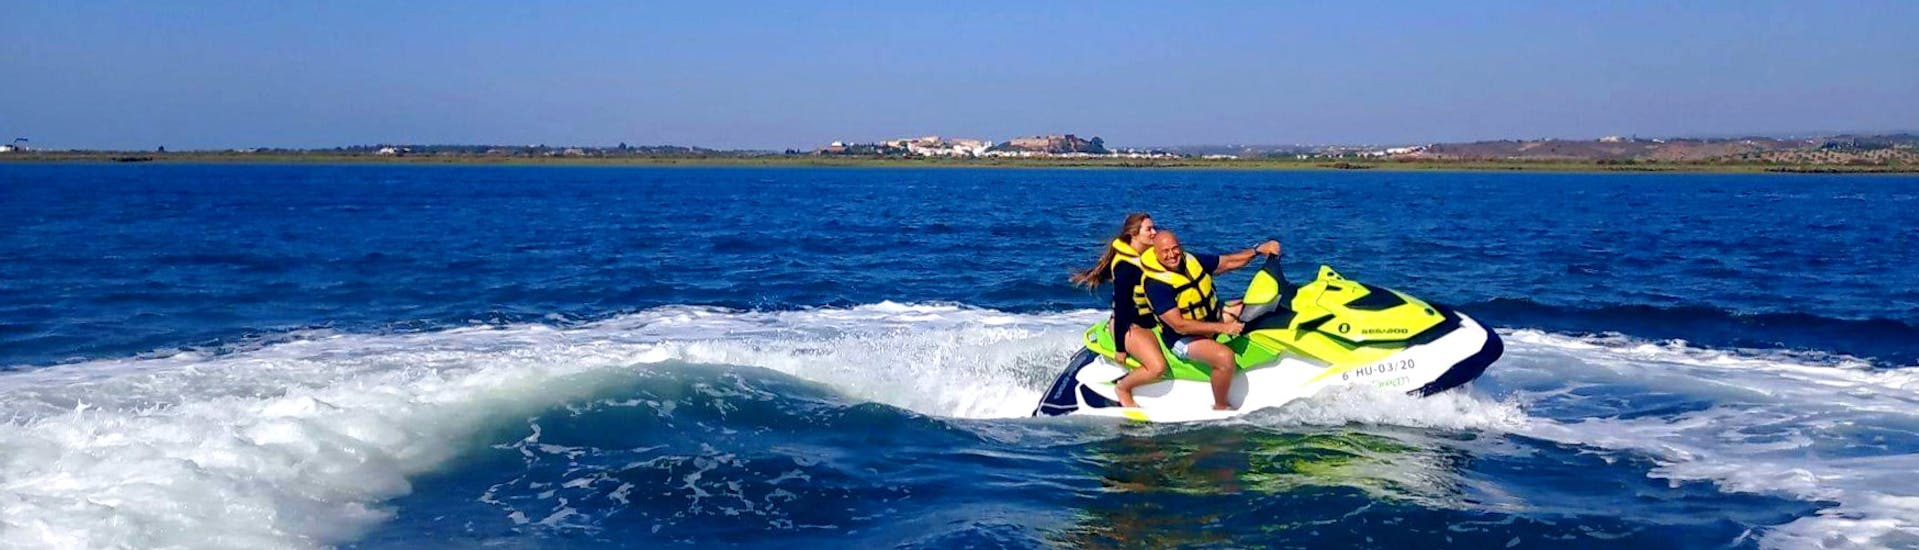 Two participants splashing around in the waters of the Guadiana River, having fun during a jet ski safari with Jet Ski Dreams Huelva.